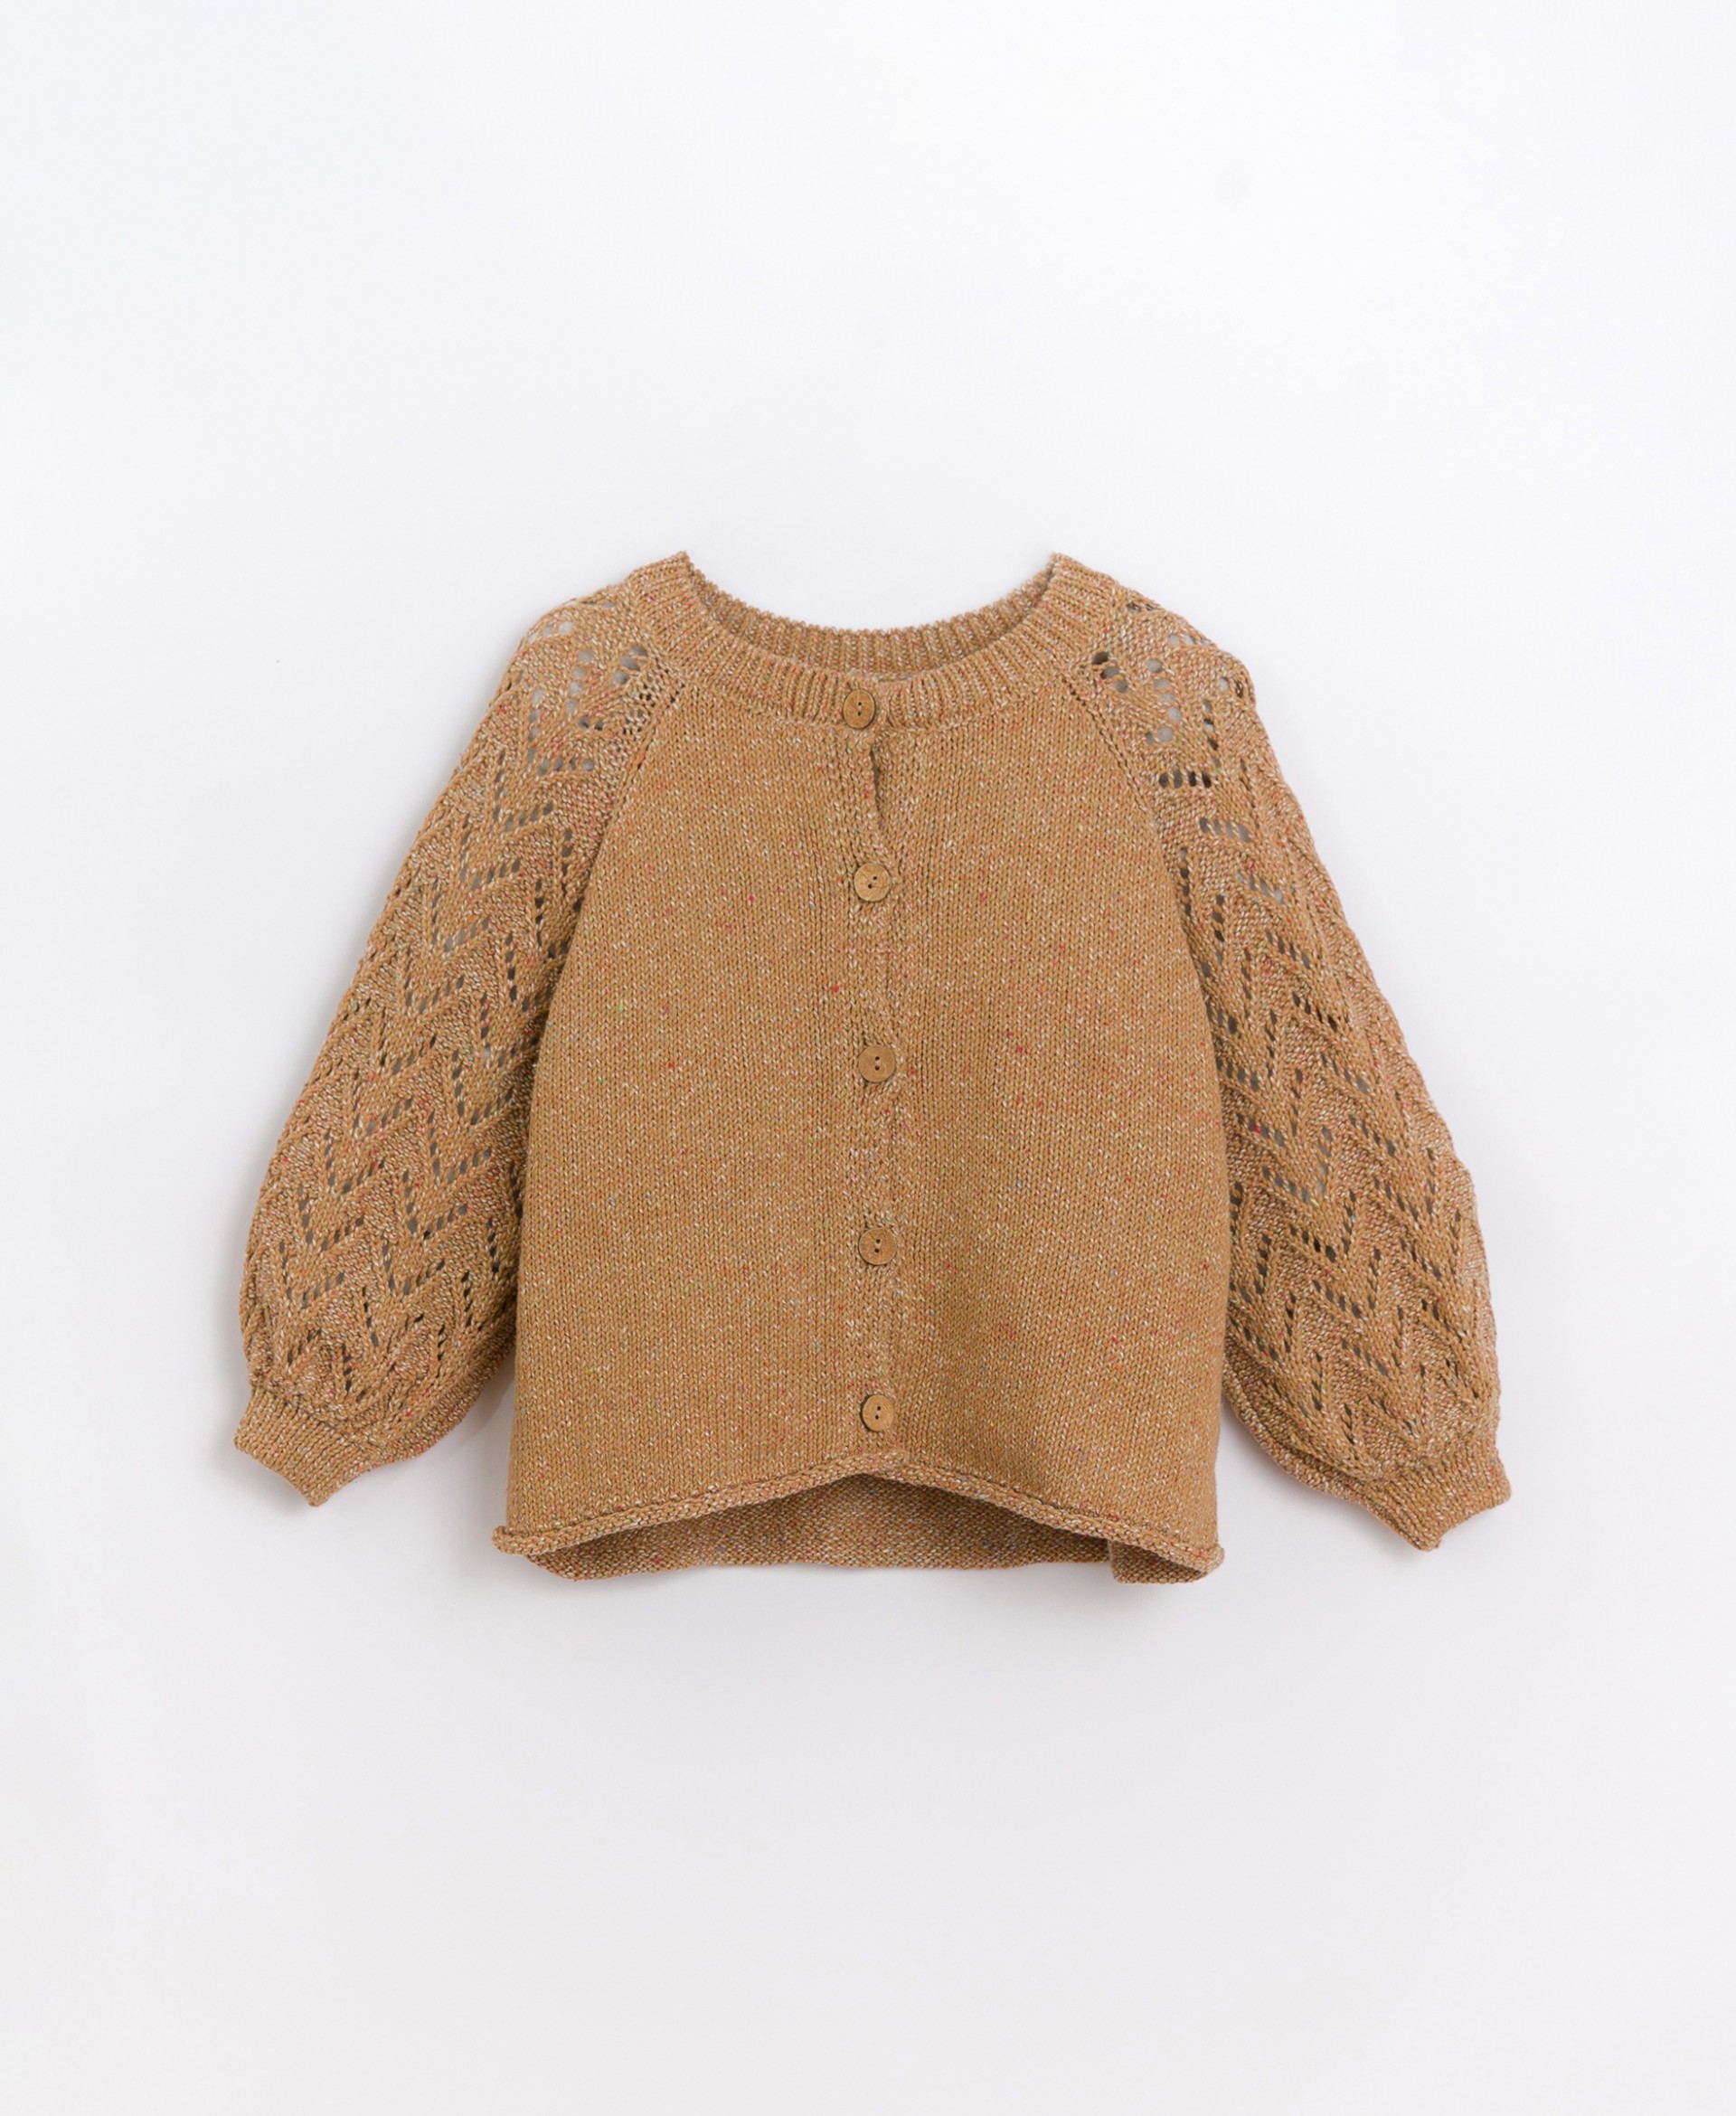 Knit jacket with coconut shell buttons | Basketry